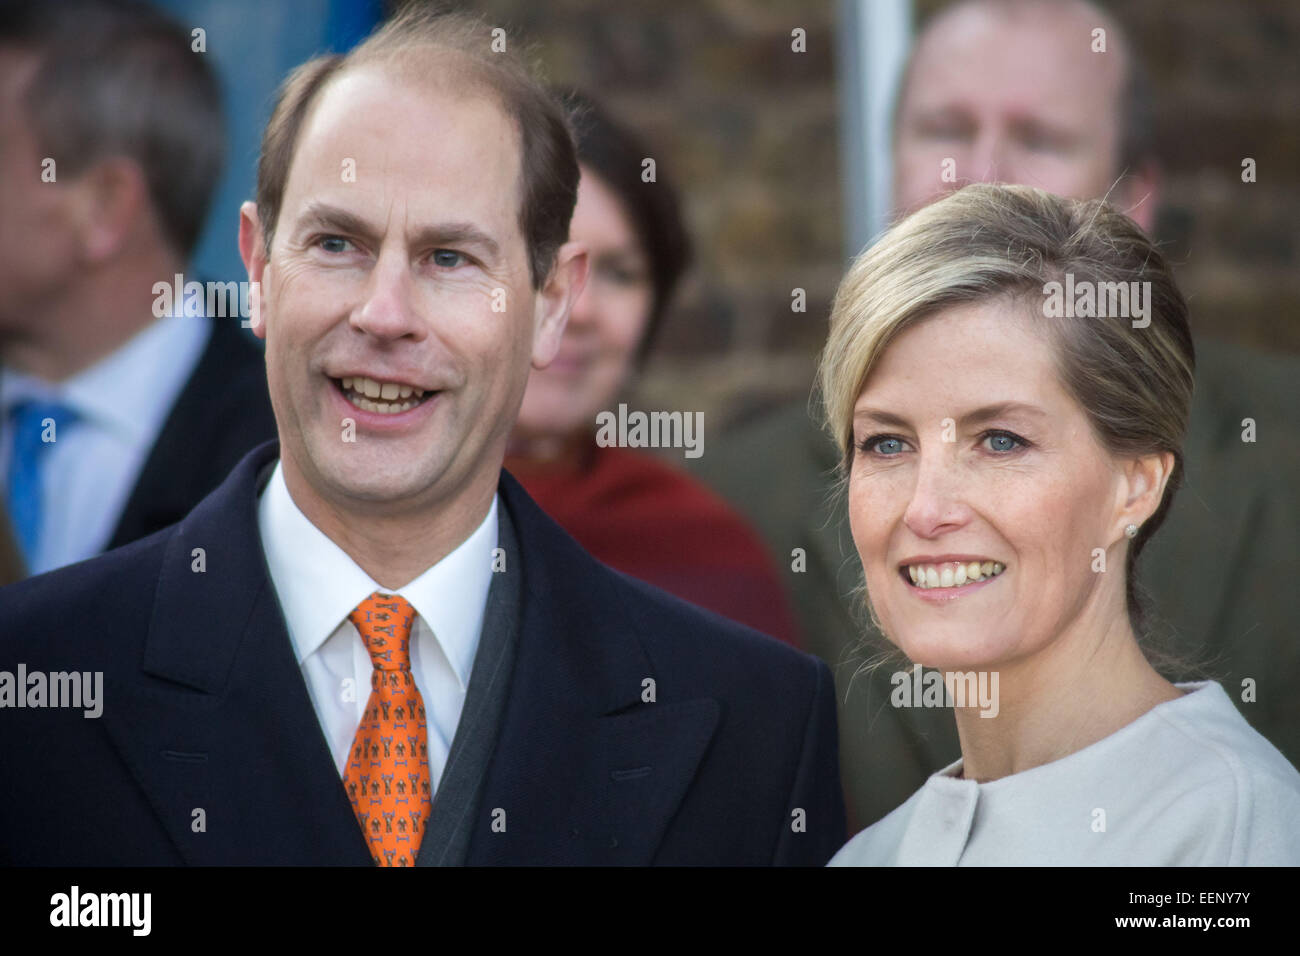 London, UK. 20th Jan, 2015. The Earl and Countess of Wessex attend an engagement in support of The Queen's Diamond Jubilee Trust and Tomorrow's People charity on The Countess' 50th birthday at St. Anselm's Church, Kennington. Credit: Guy Corbishley/Alamy Live News Stock Photo